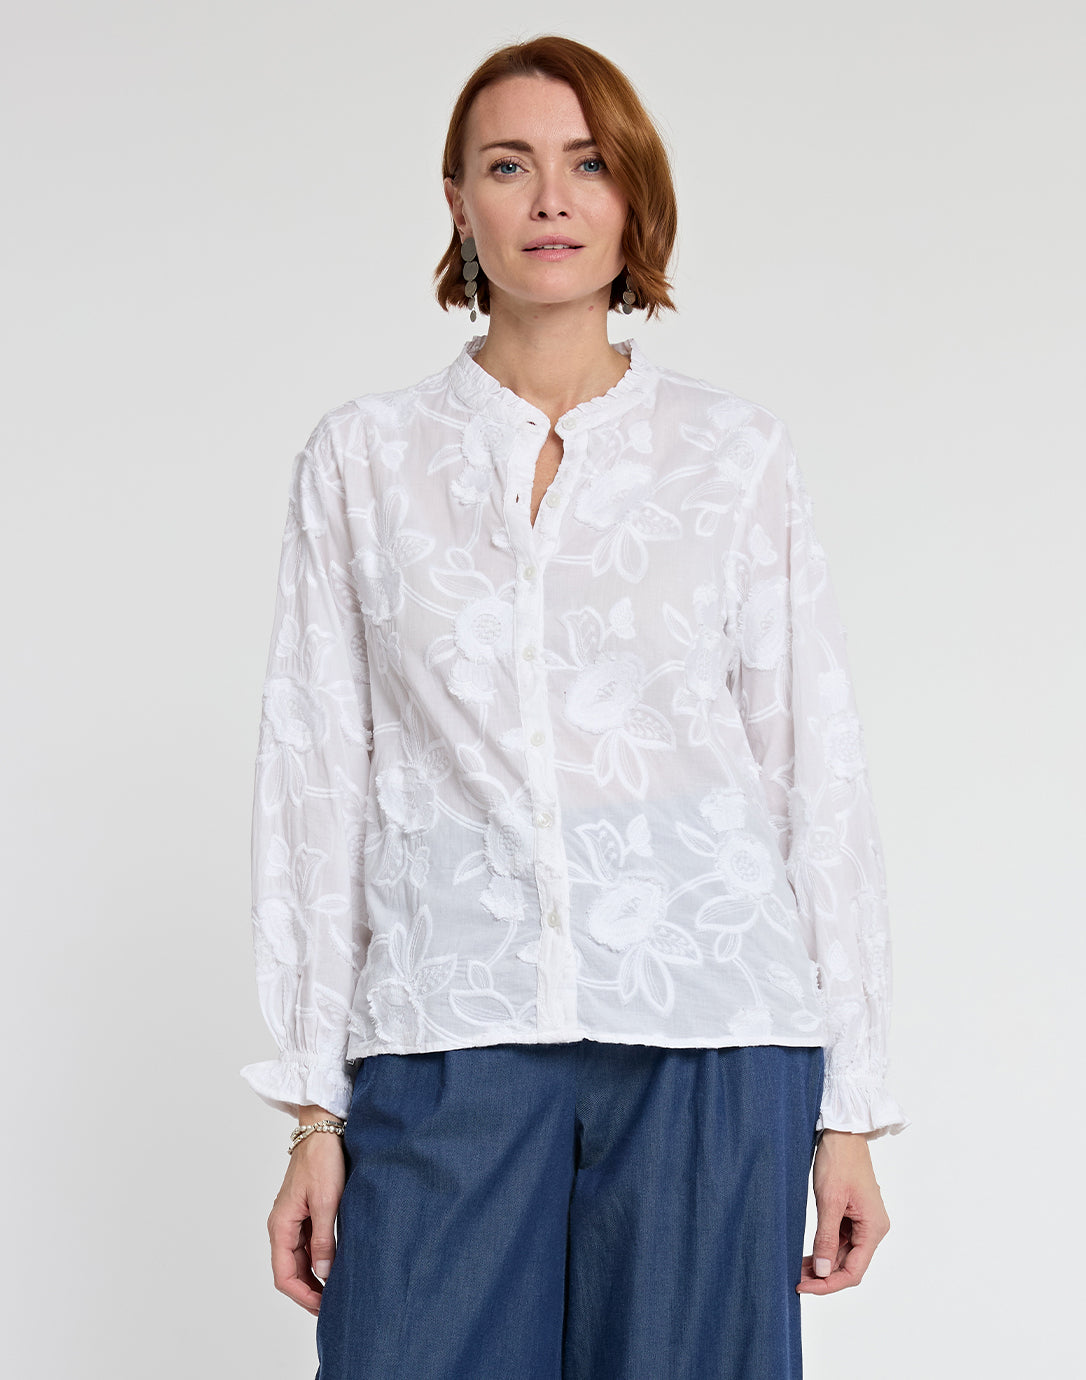 Panhandle R4S1219 Womens Long Sleeve Floral Yoke Embroidery Shirts